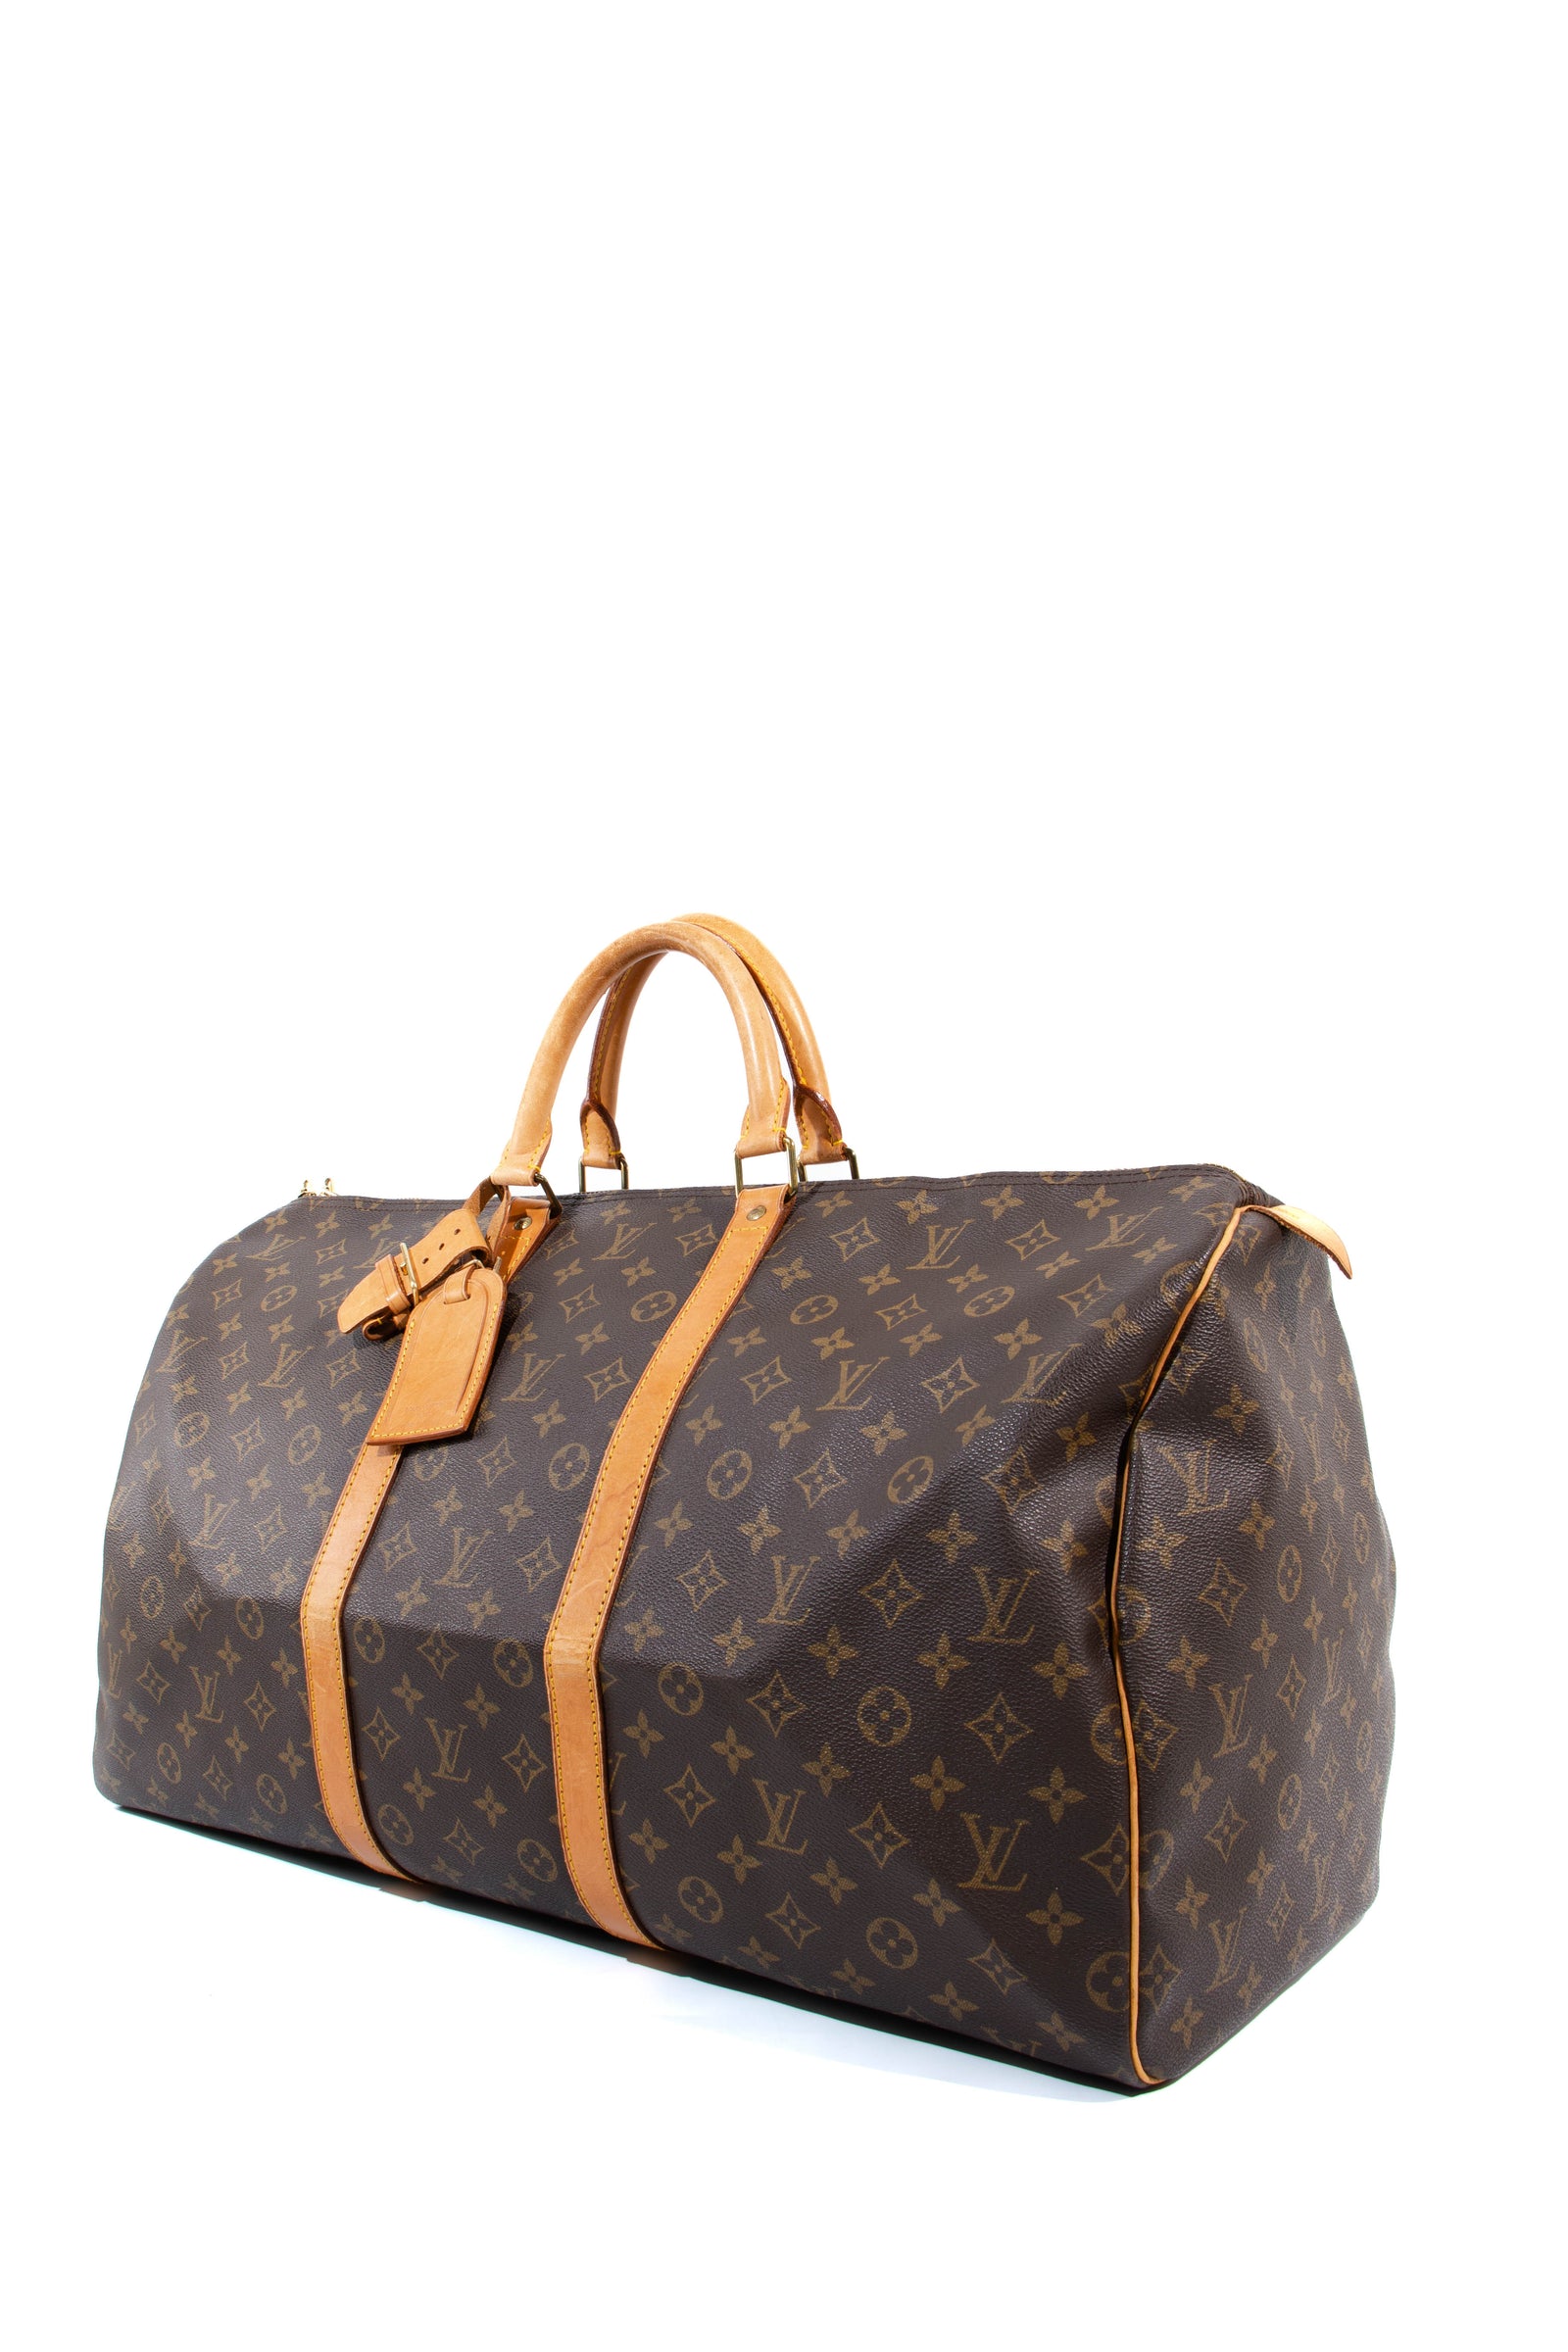 Louis Vuitton Keepall Bandouliere 50B M20558 by The-Collectory